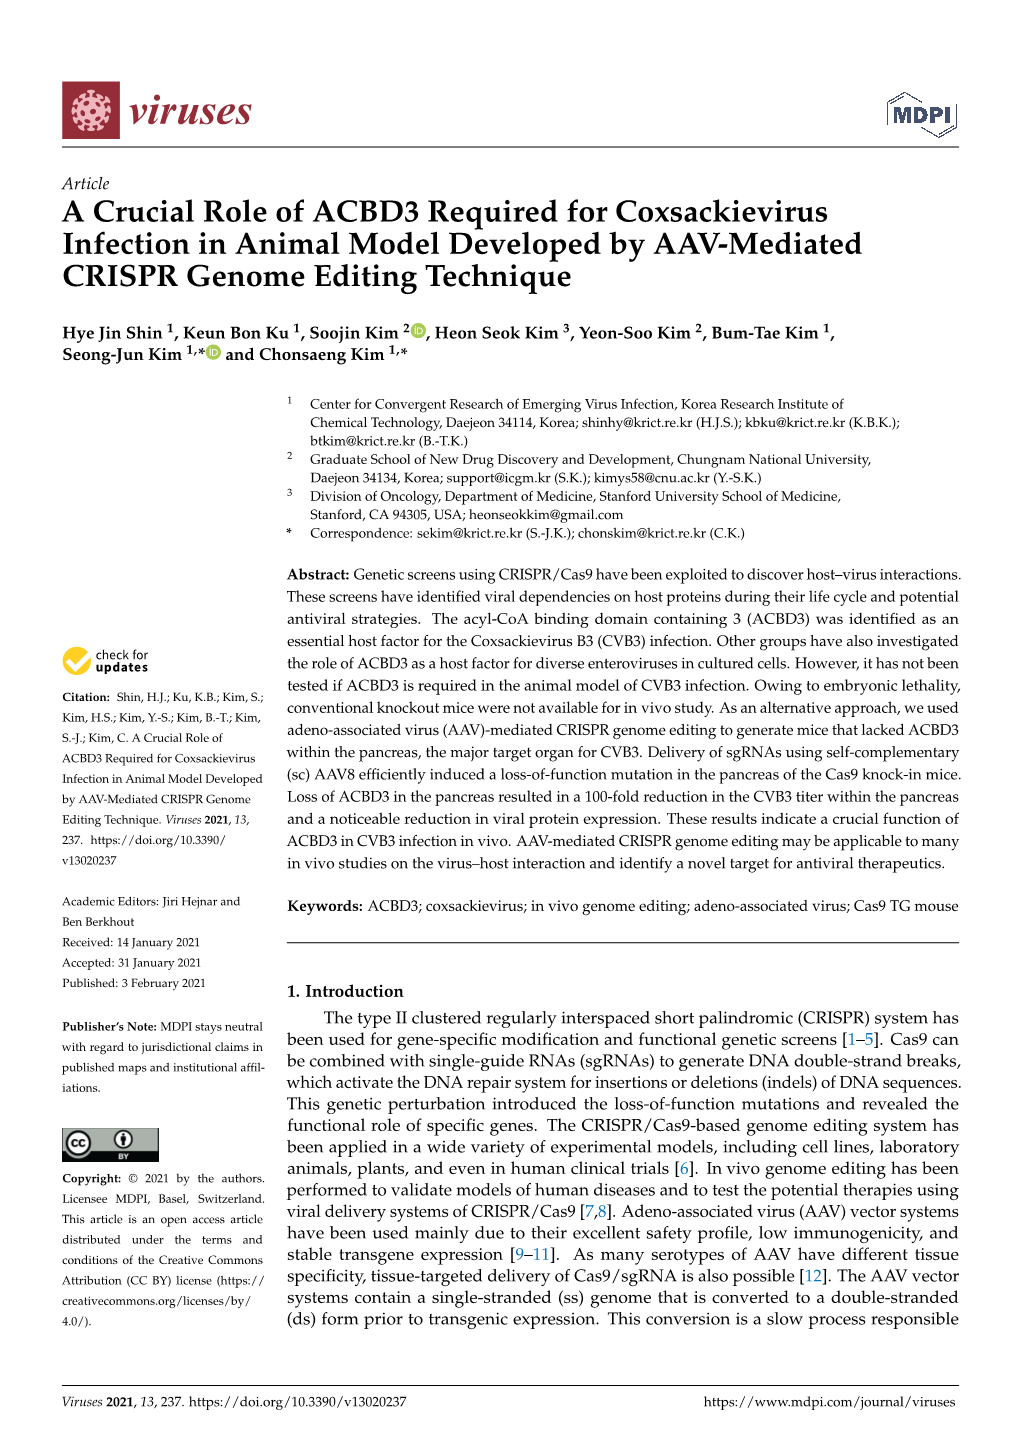 A Crucial Role of ACBD3 Required for Coxsackievirus Infection in Animal Model Developed by AAV-Mediated CRISPR Genome Editing Technique